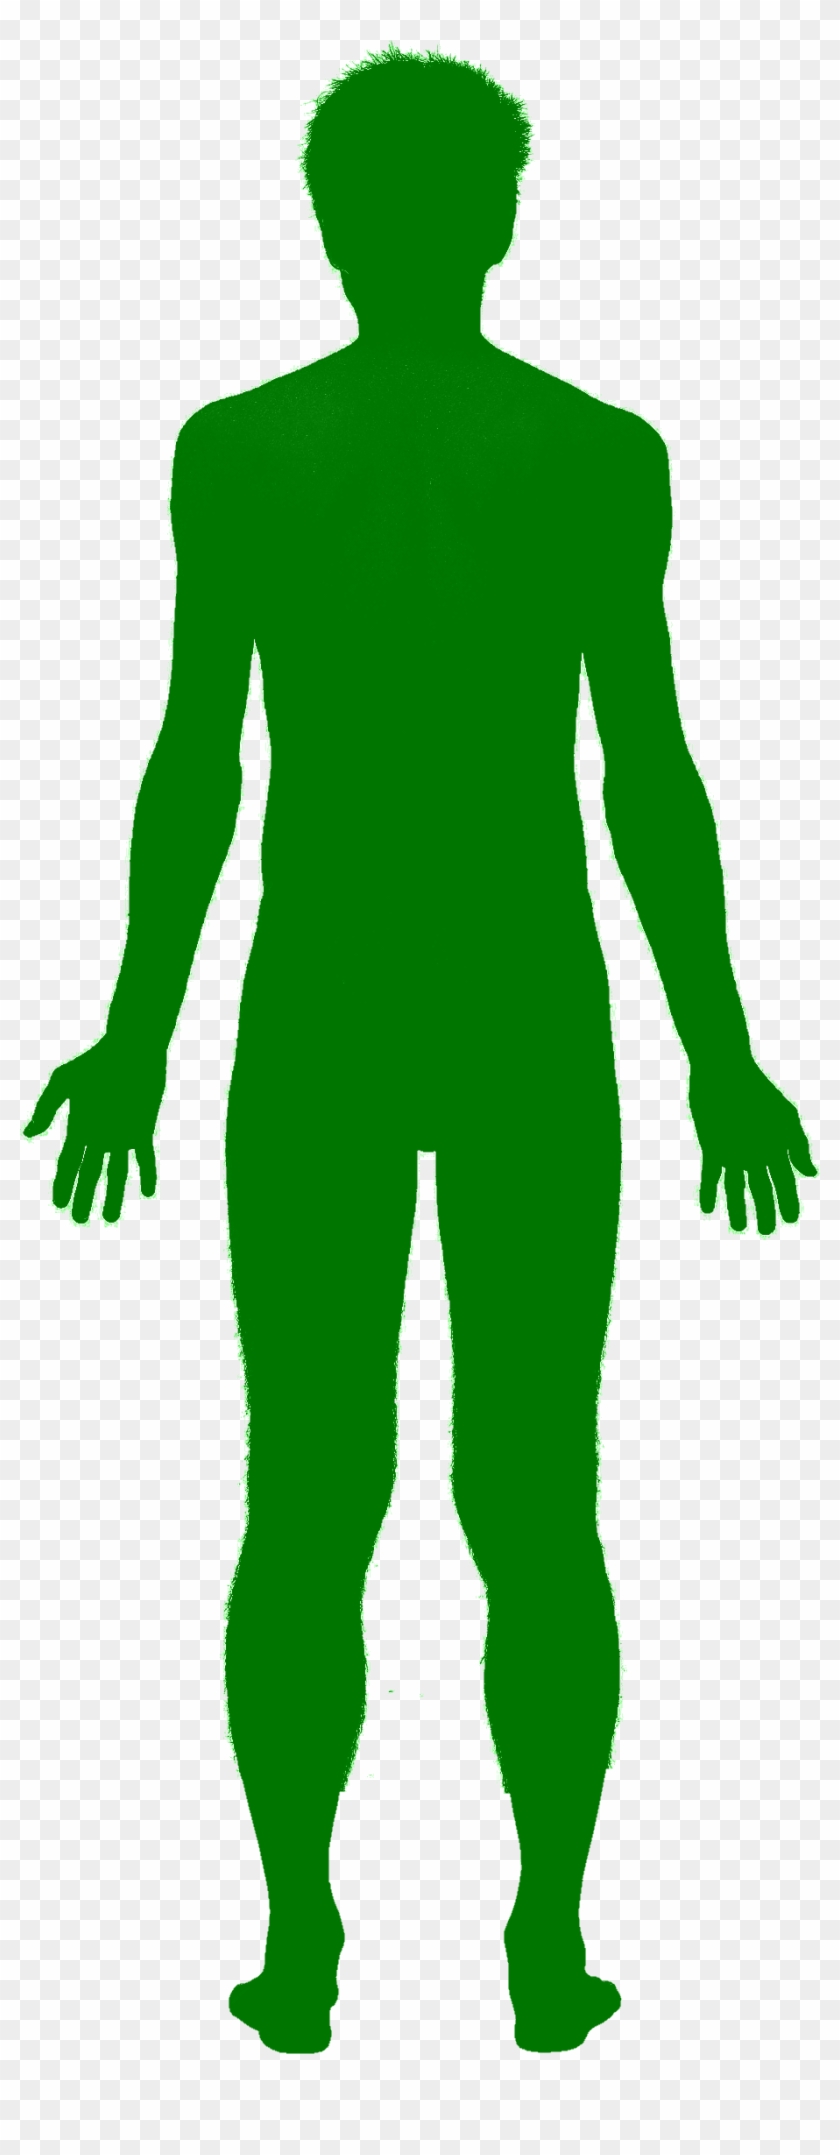 Human Shadow Clipart Png - Green Silhouette Png #1102872